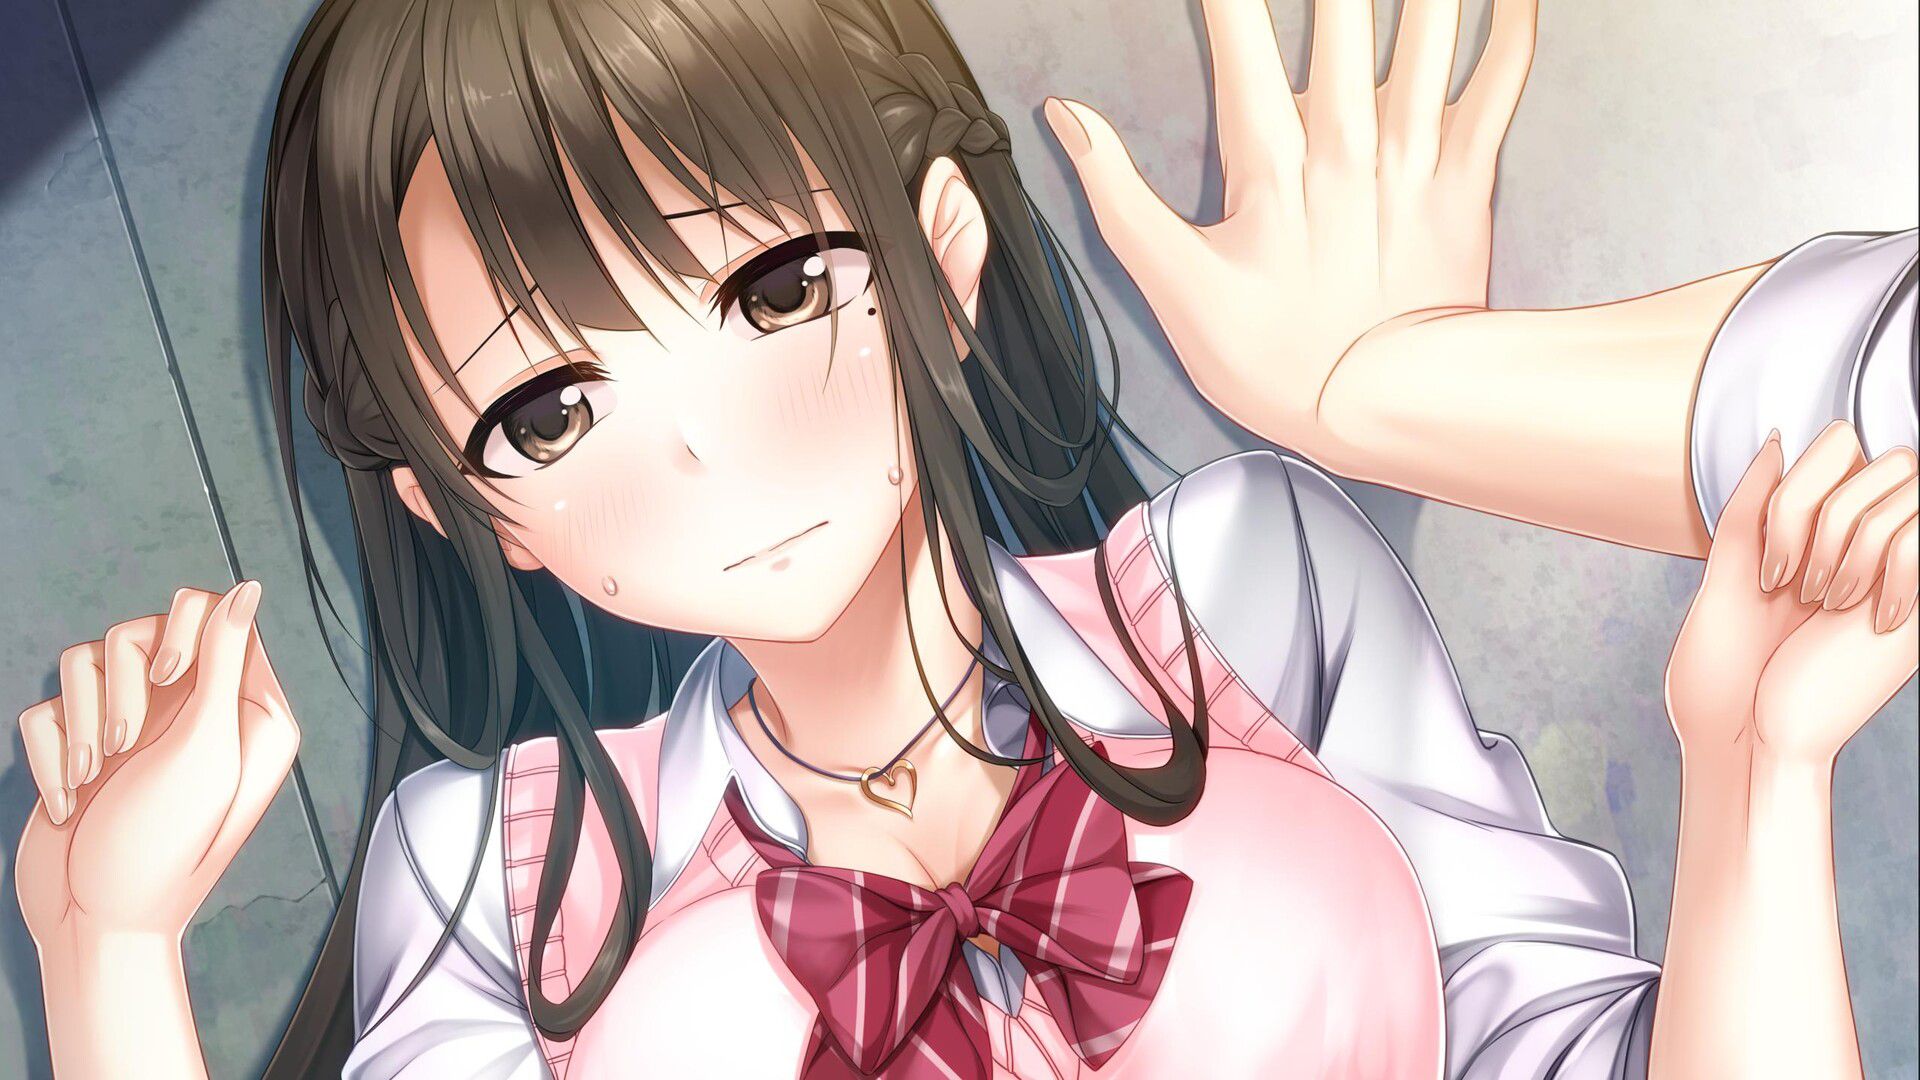 PS4 / switch version [Aikis 2] erotic event CG such as girl's skirt raise and swimsuit 9